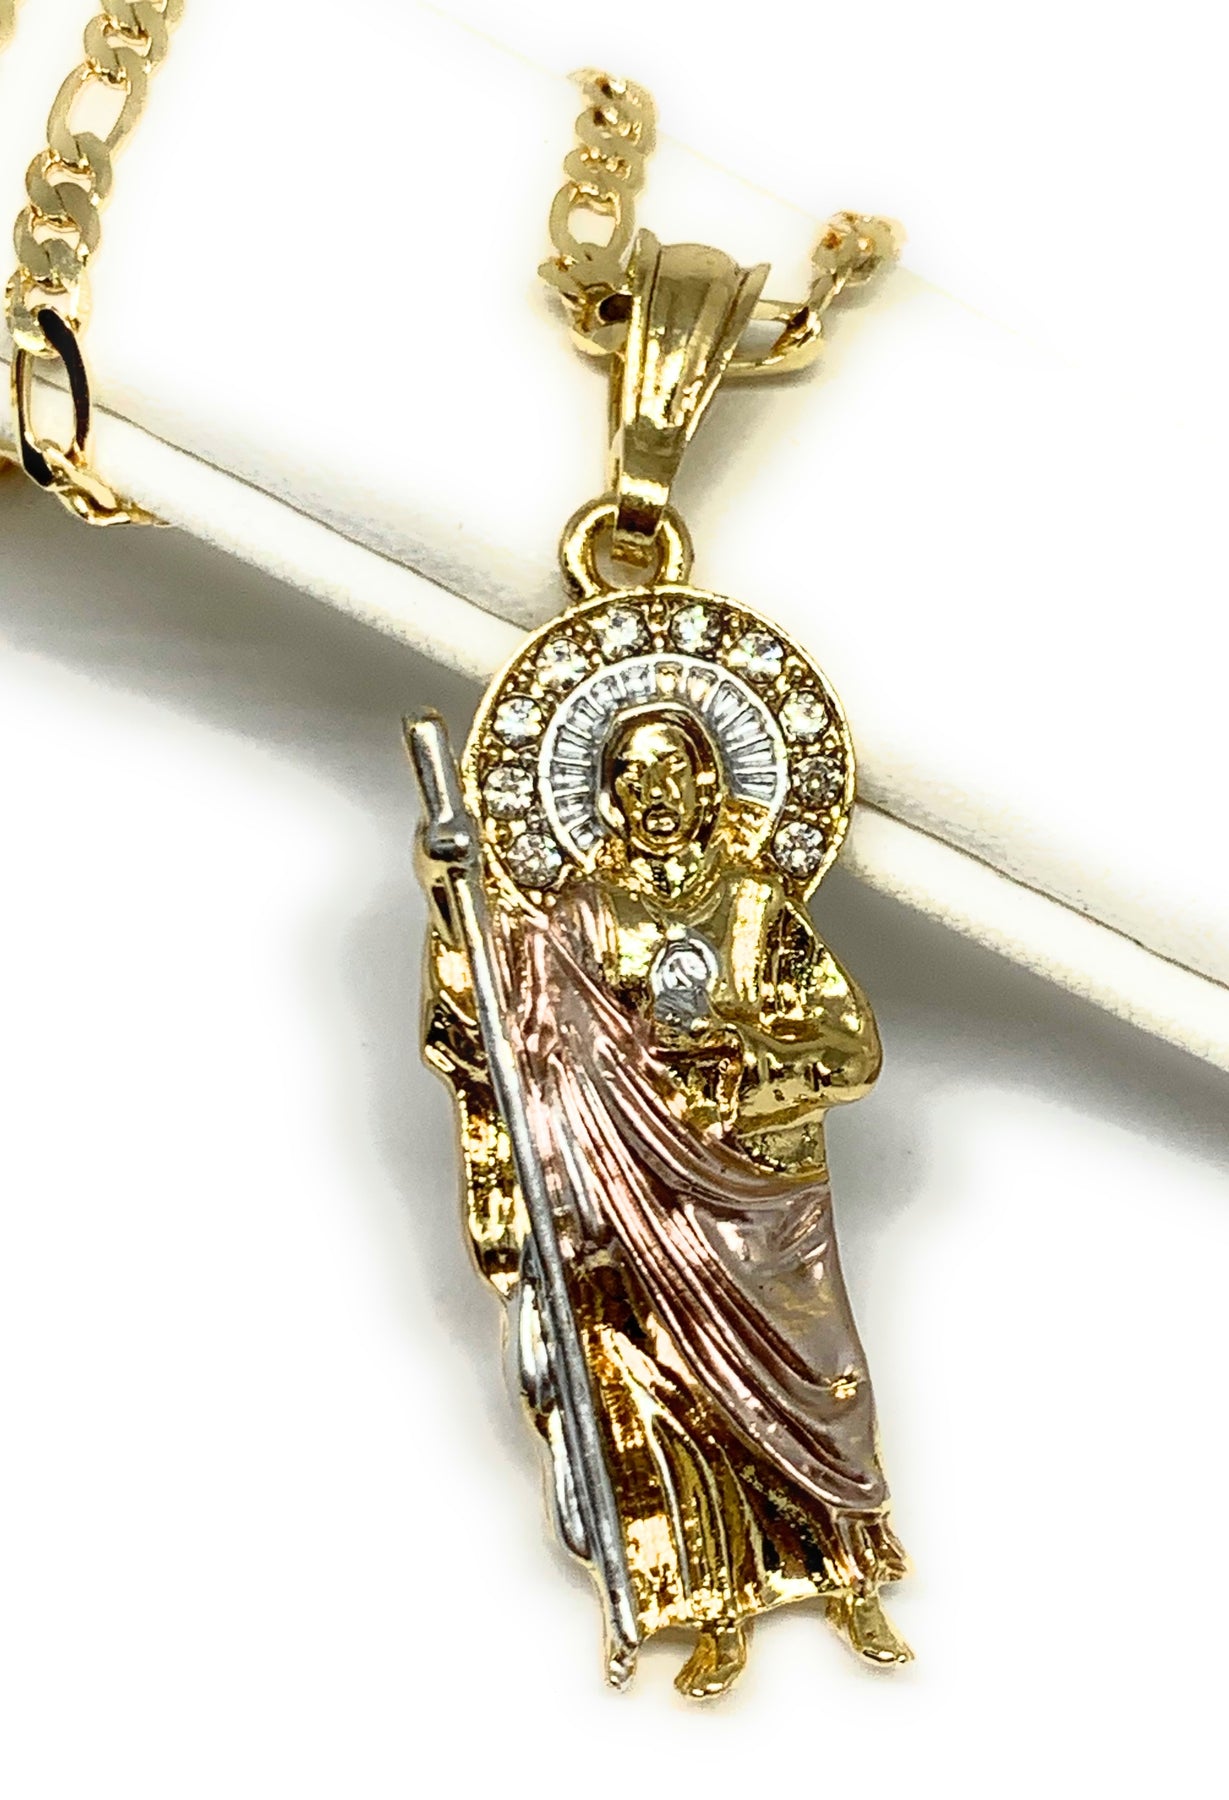 Gold Plated Saint Jude Pendant Necklace Chain San Judas Tadeo Jewelry Yellow Only